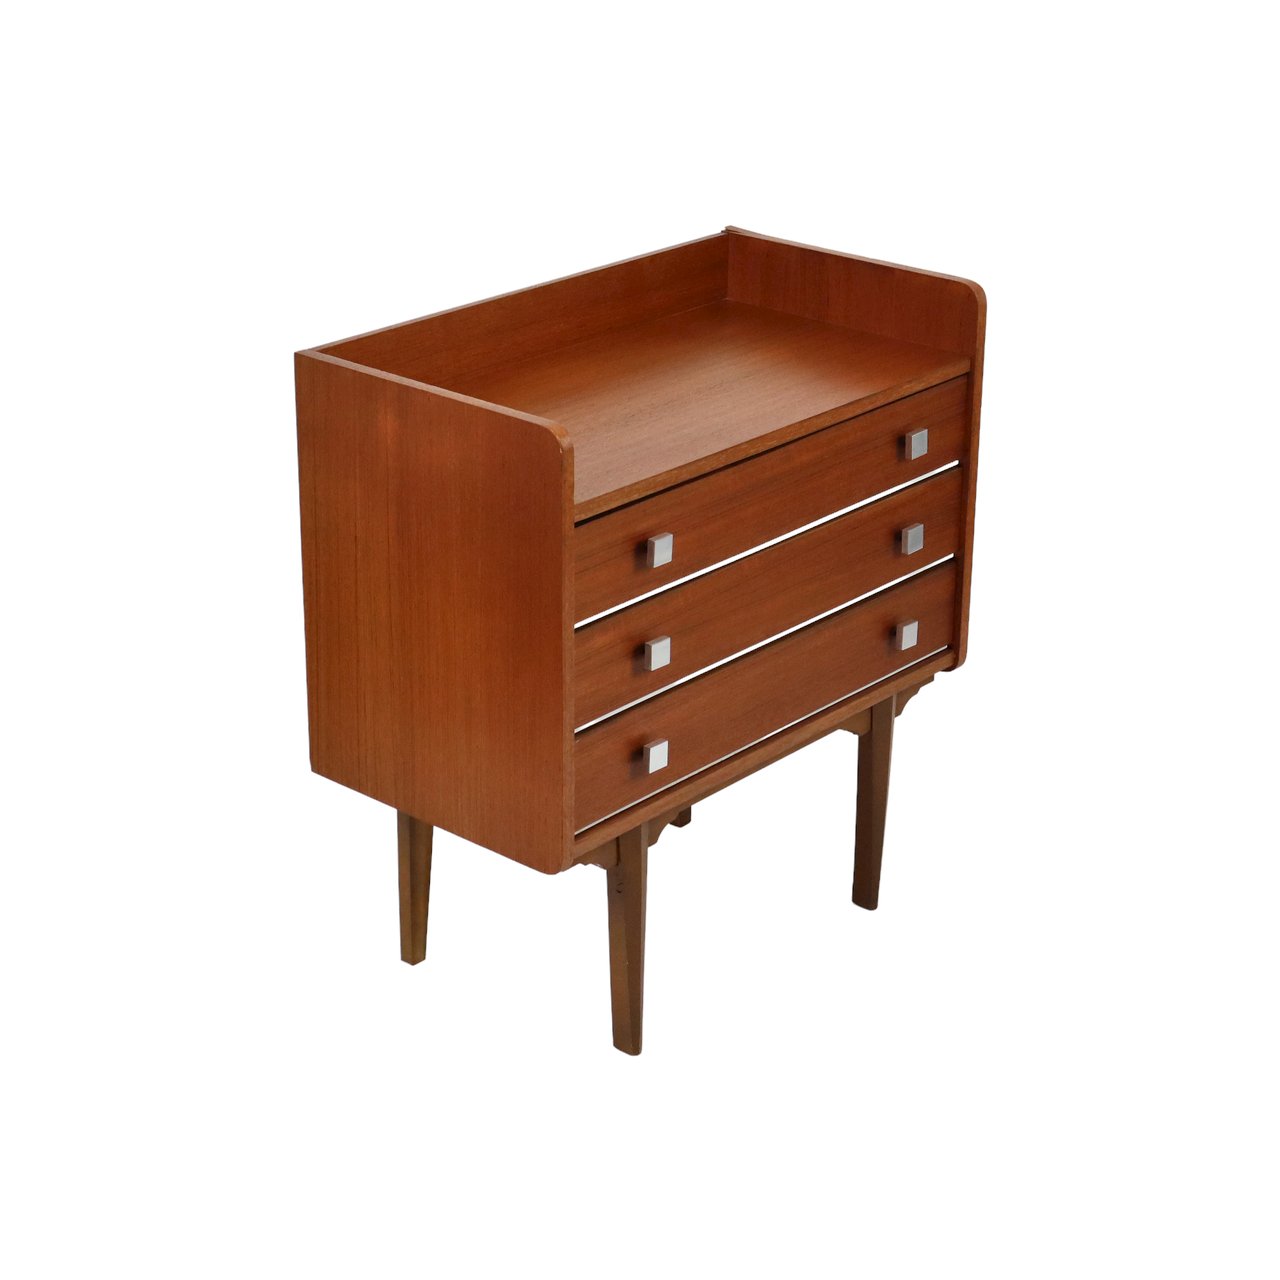 Vintage chest of drawers | € 225 | Whoppah